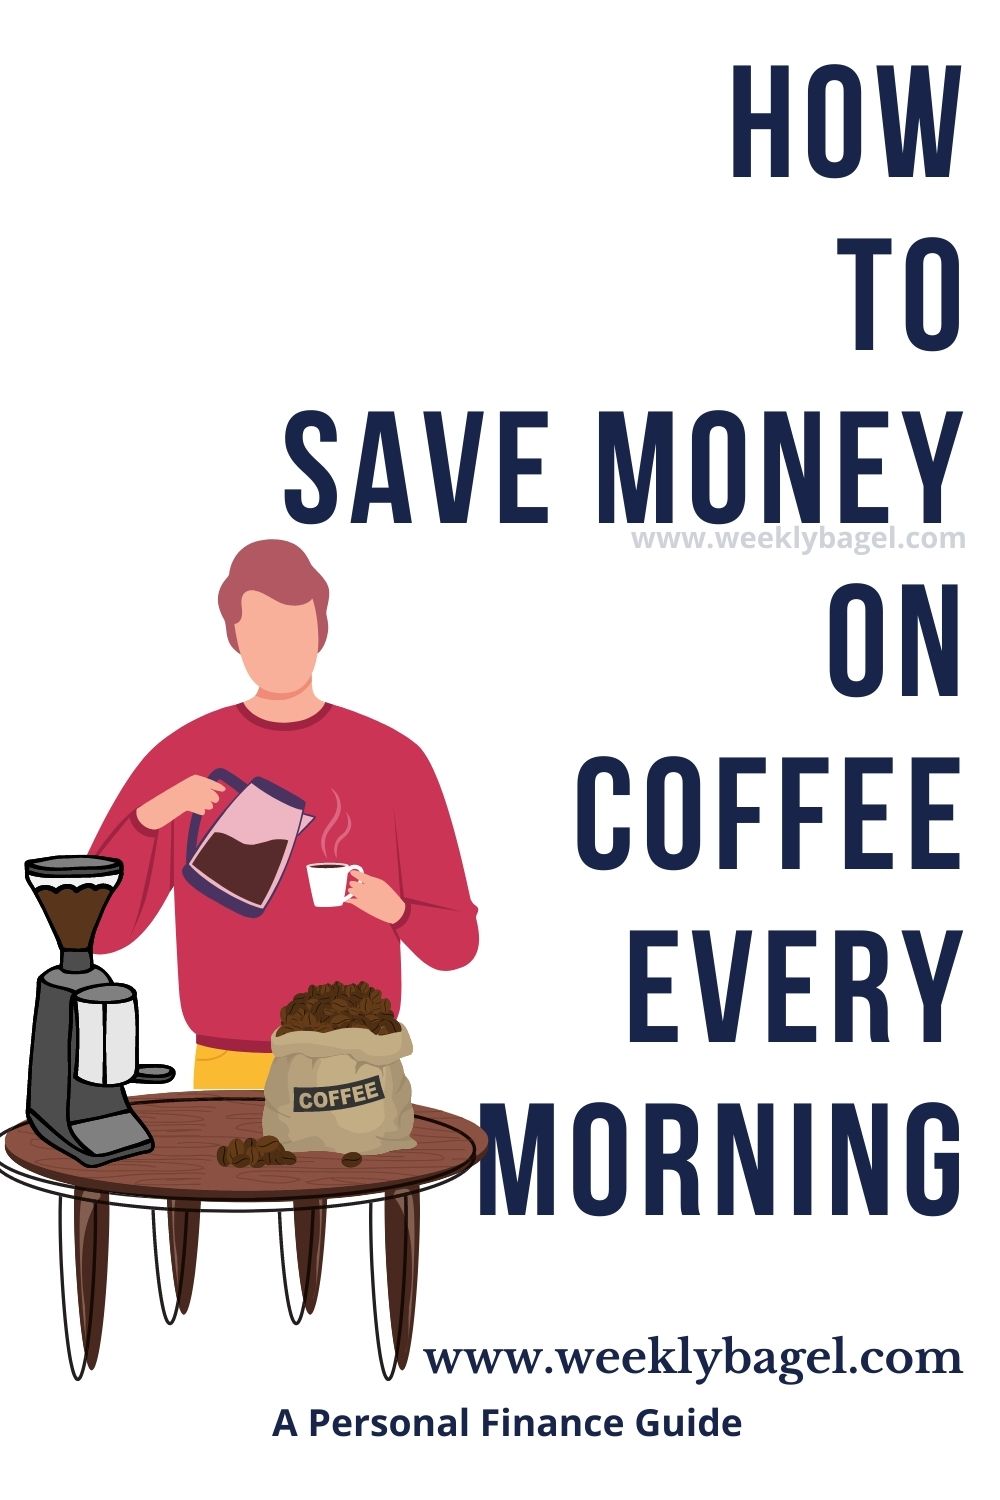 How To Save Money On Coffee